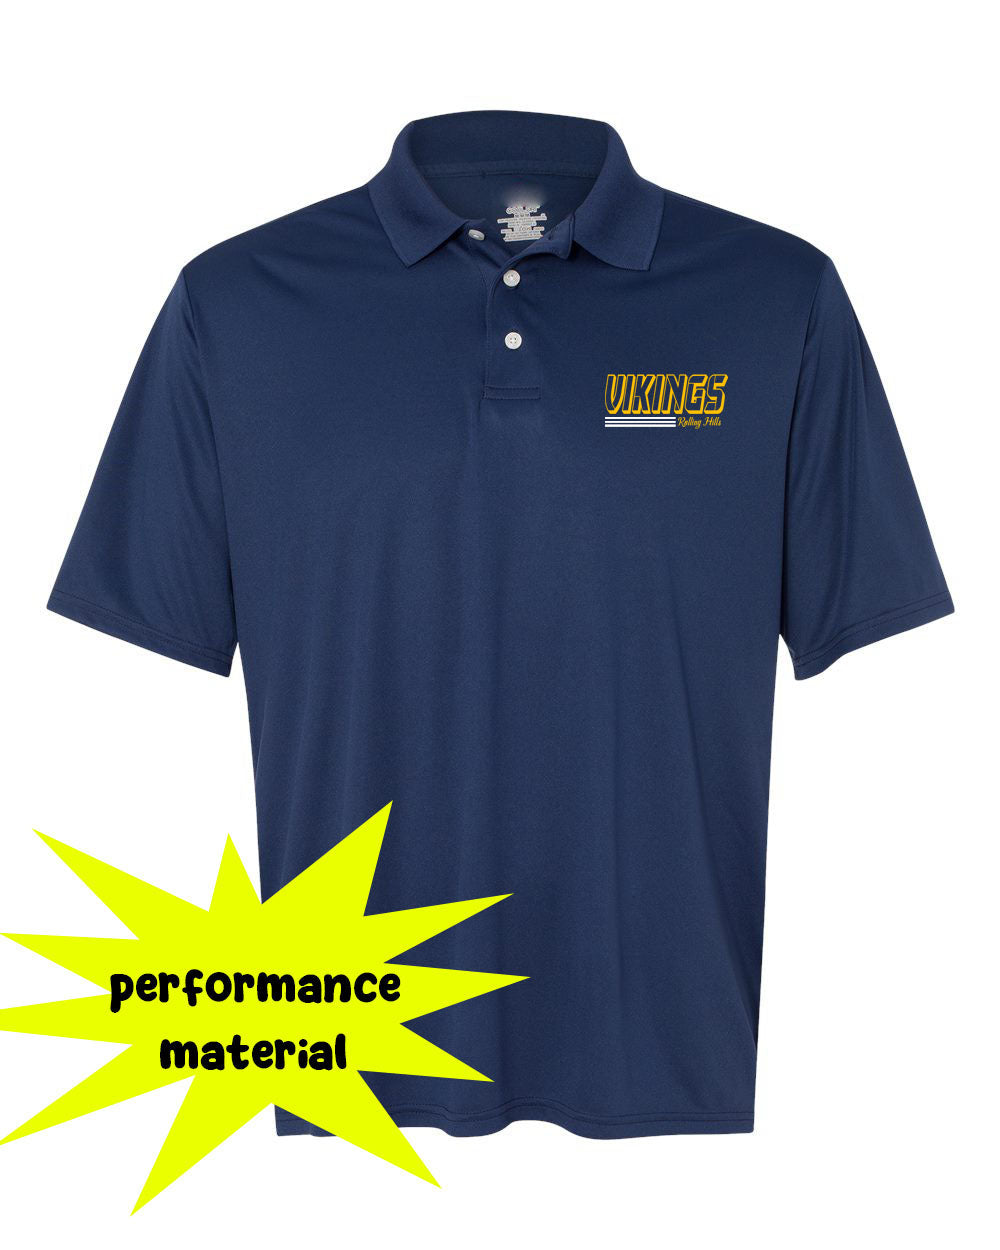 Rolling Hills Performance Material Polo T-Shirt Design 7